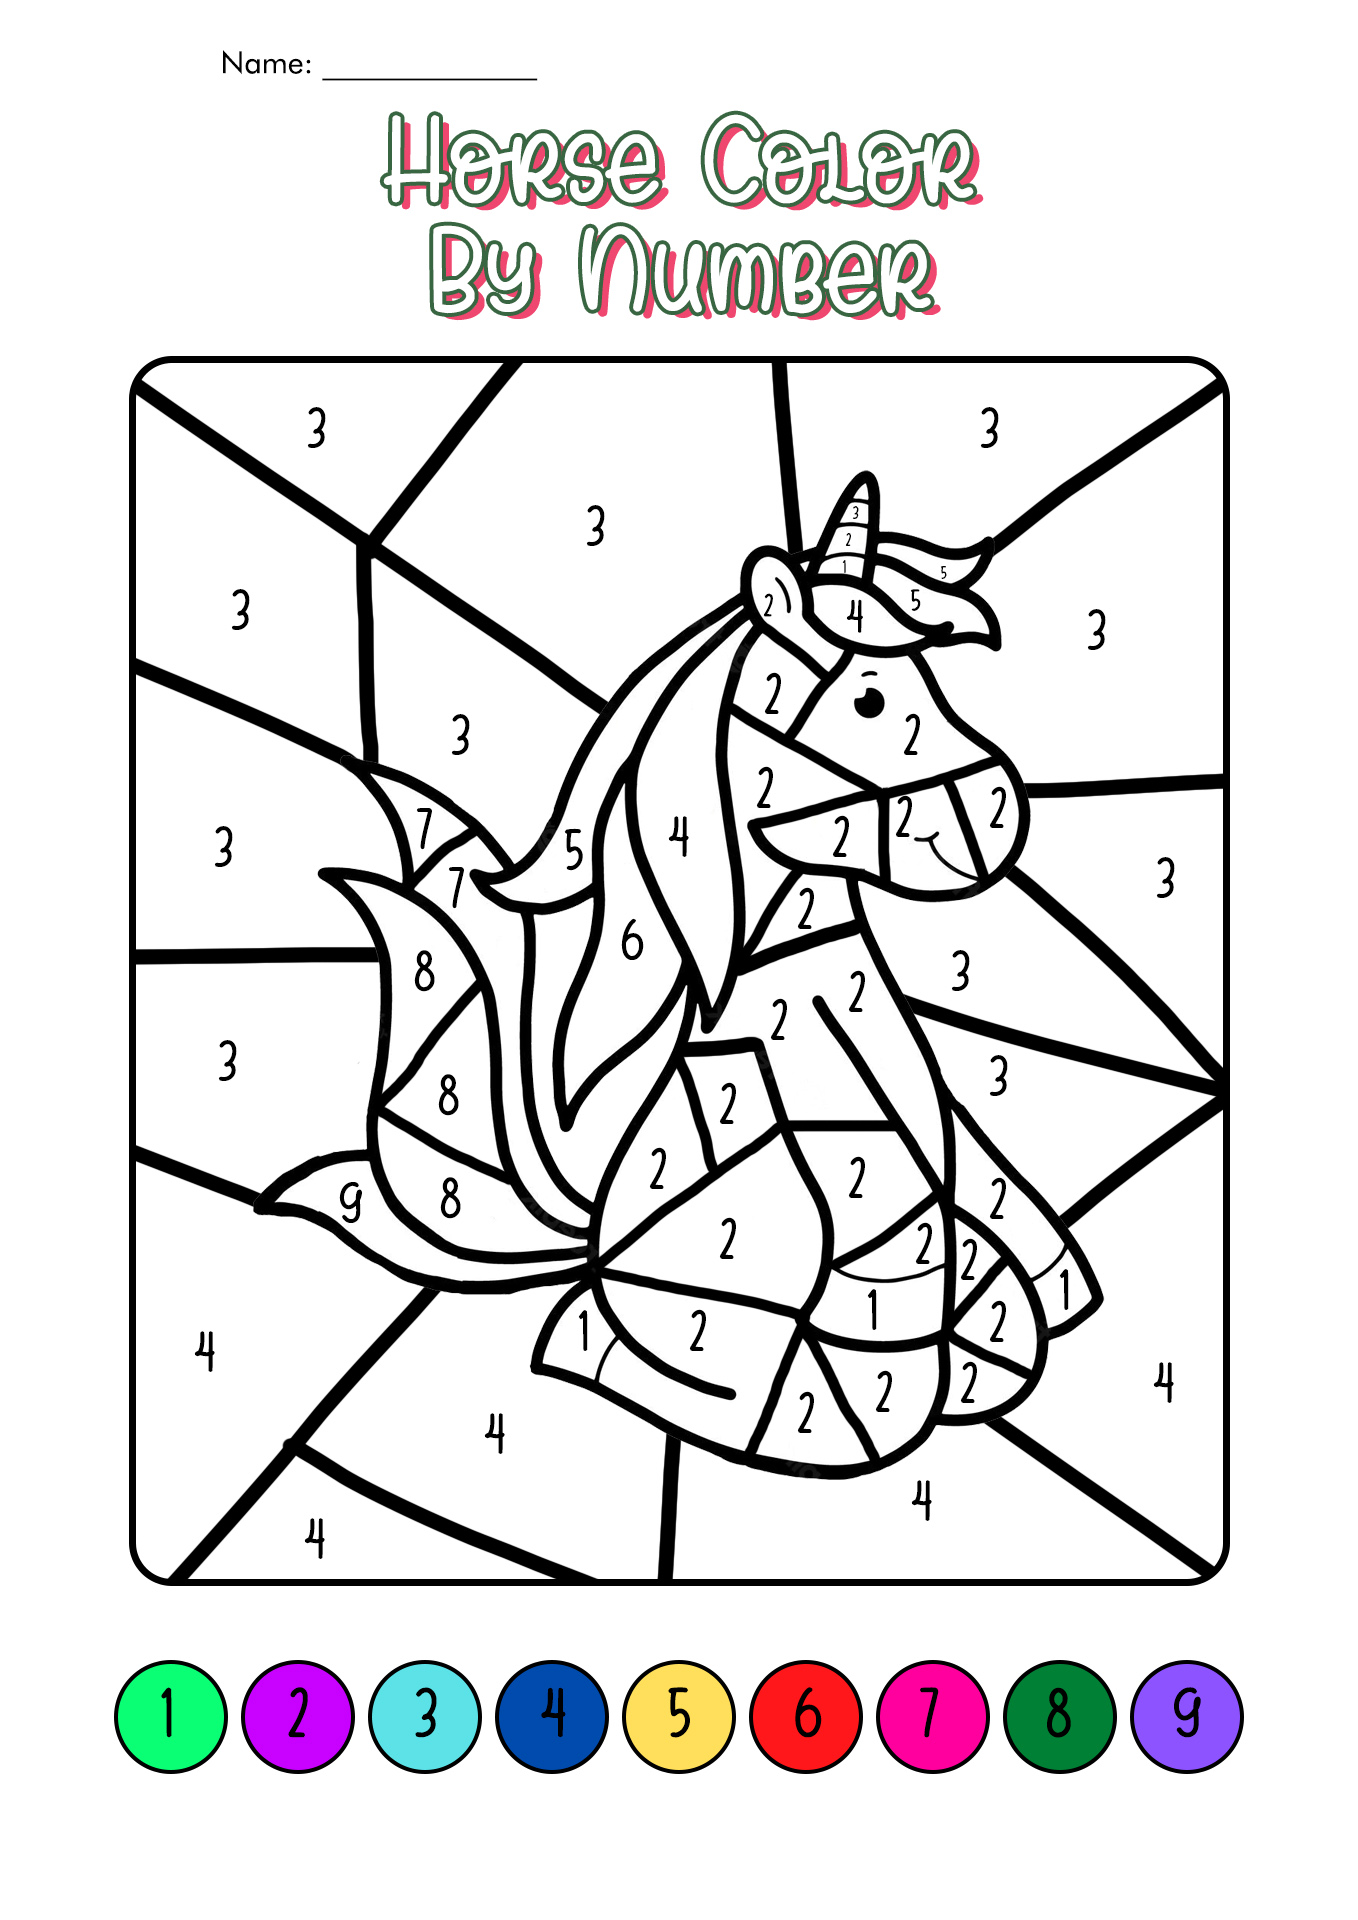 Horse Color by Number Coloring Pages for Adults